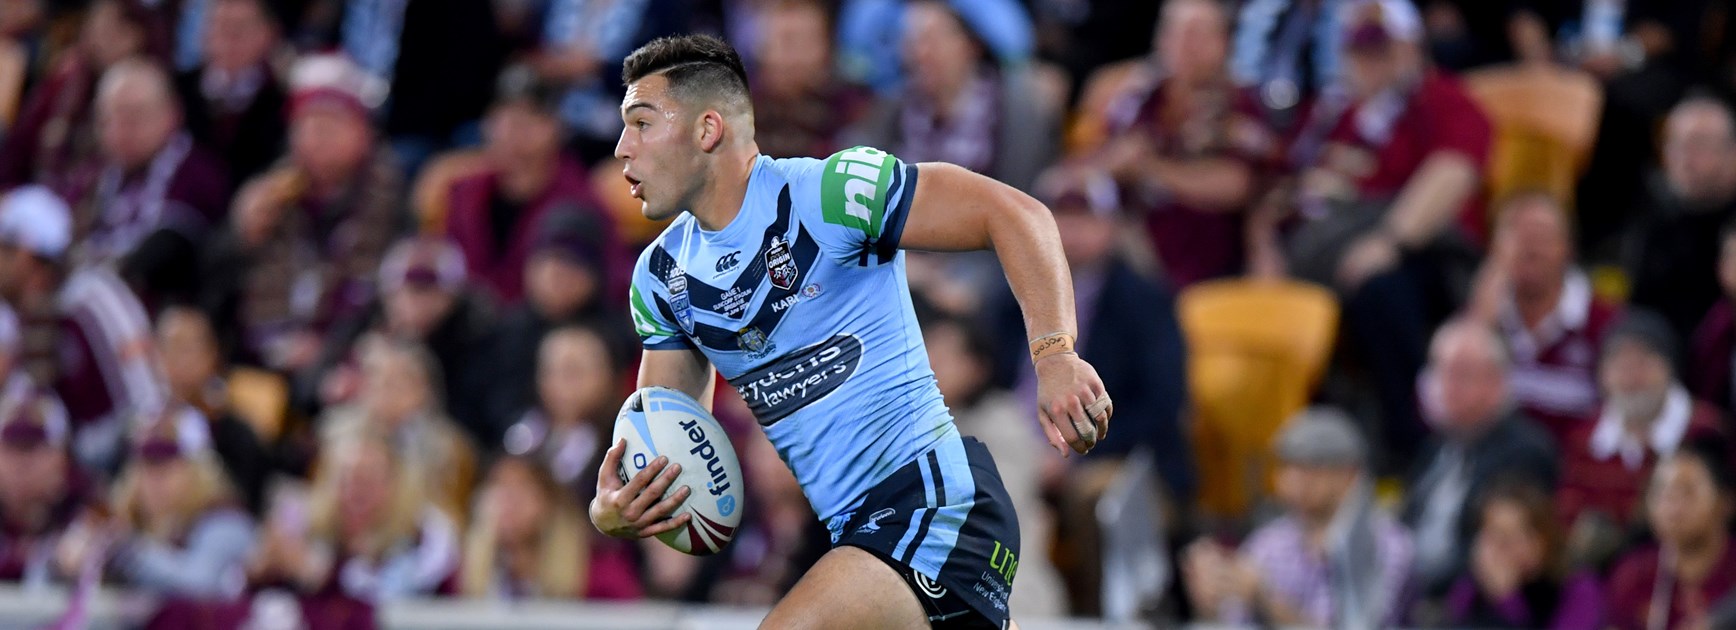 Ranking the Blues backs candidates for 2020 Origin